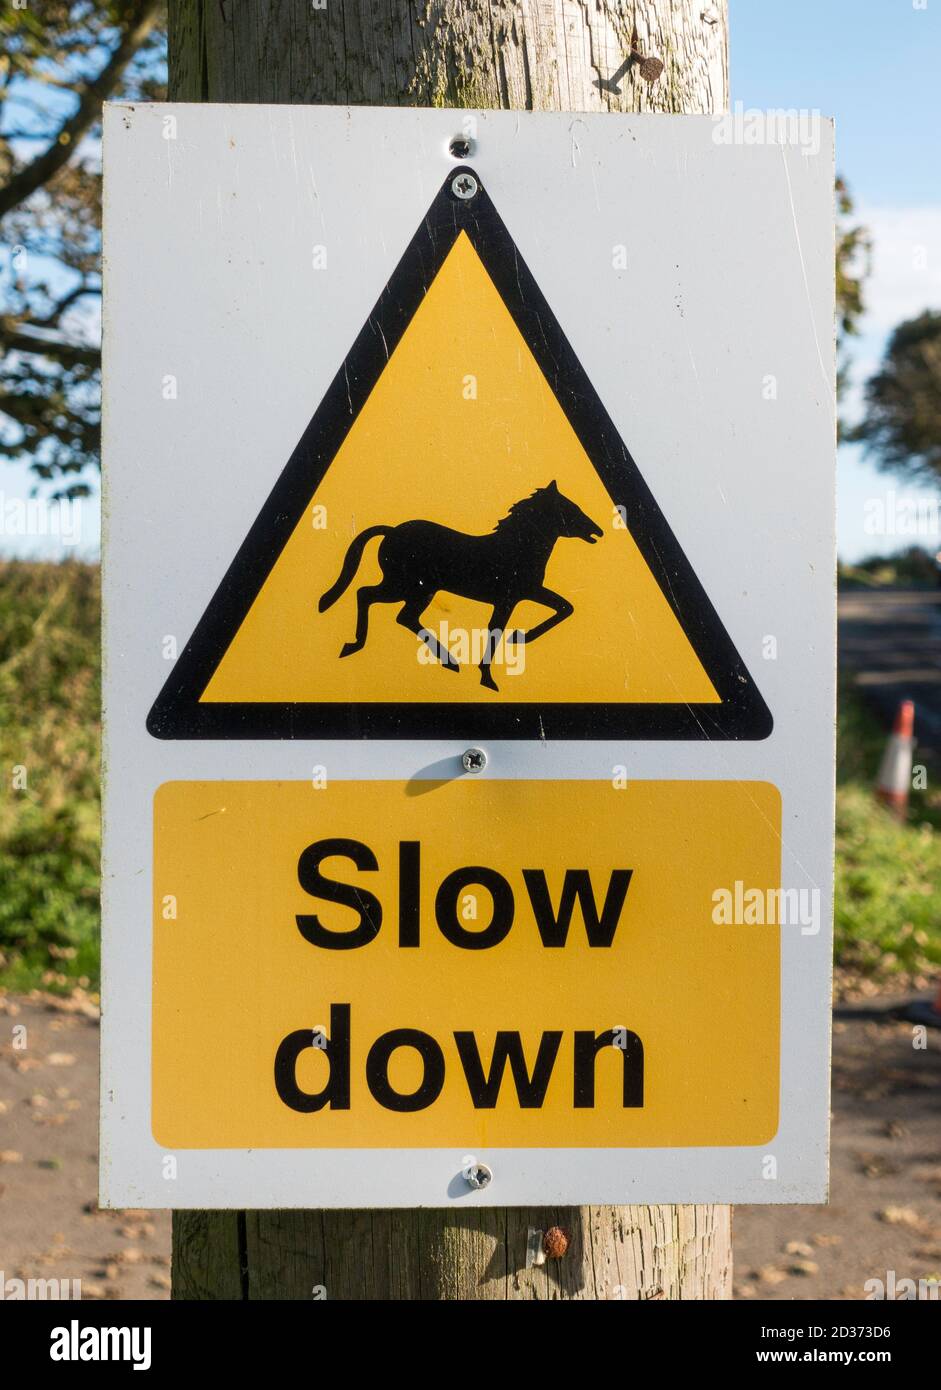 Triangular warning sign or notice horses slow down. Stock Photo